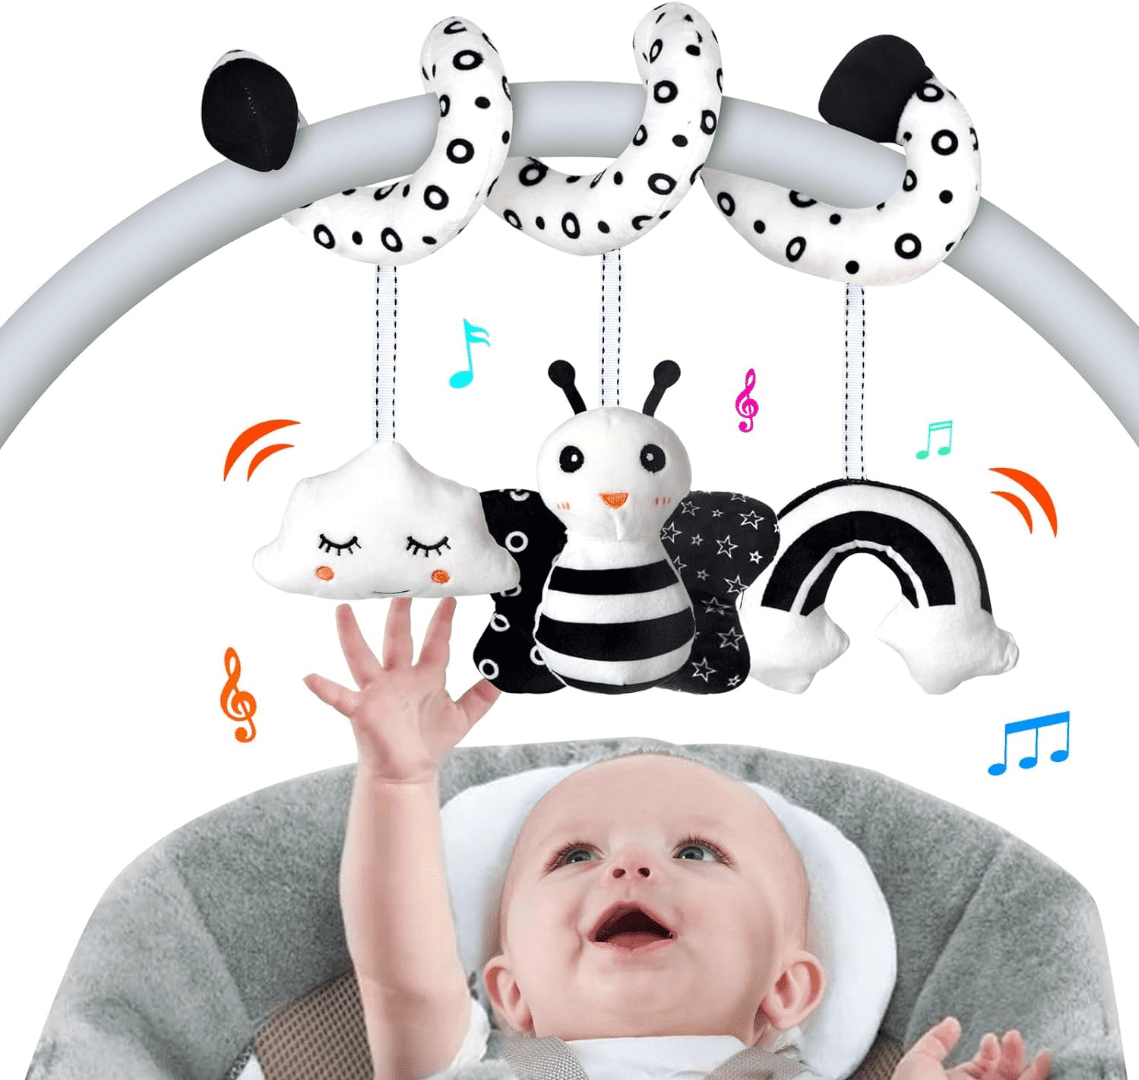 Baby Spiral Plush Toys, Black White Stroller Toy Stretch & Spiral Activity  Toy Car Seat Toys, Hanging Rattle Toys for Crib Mobile, Newborn Sensory Toy  Best Gift for 0 3 6 9 12 Months 